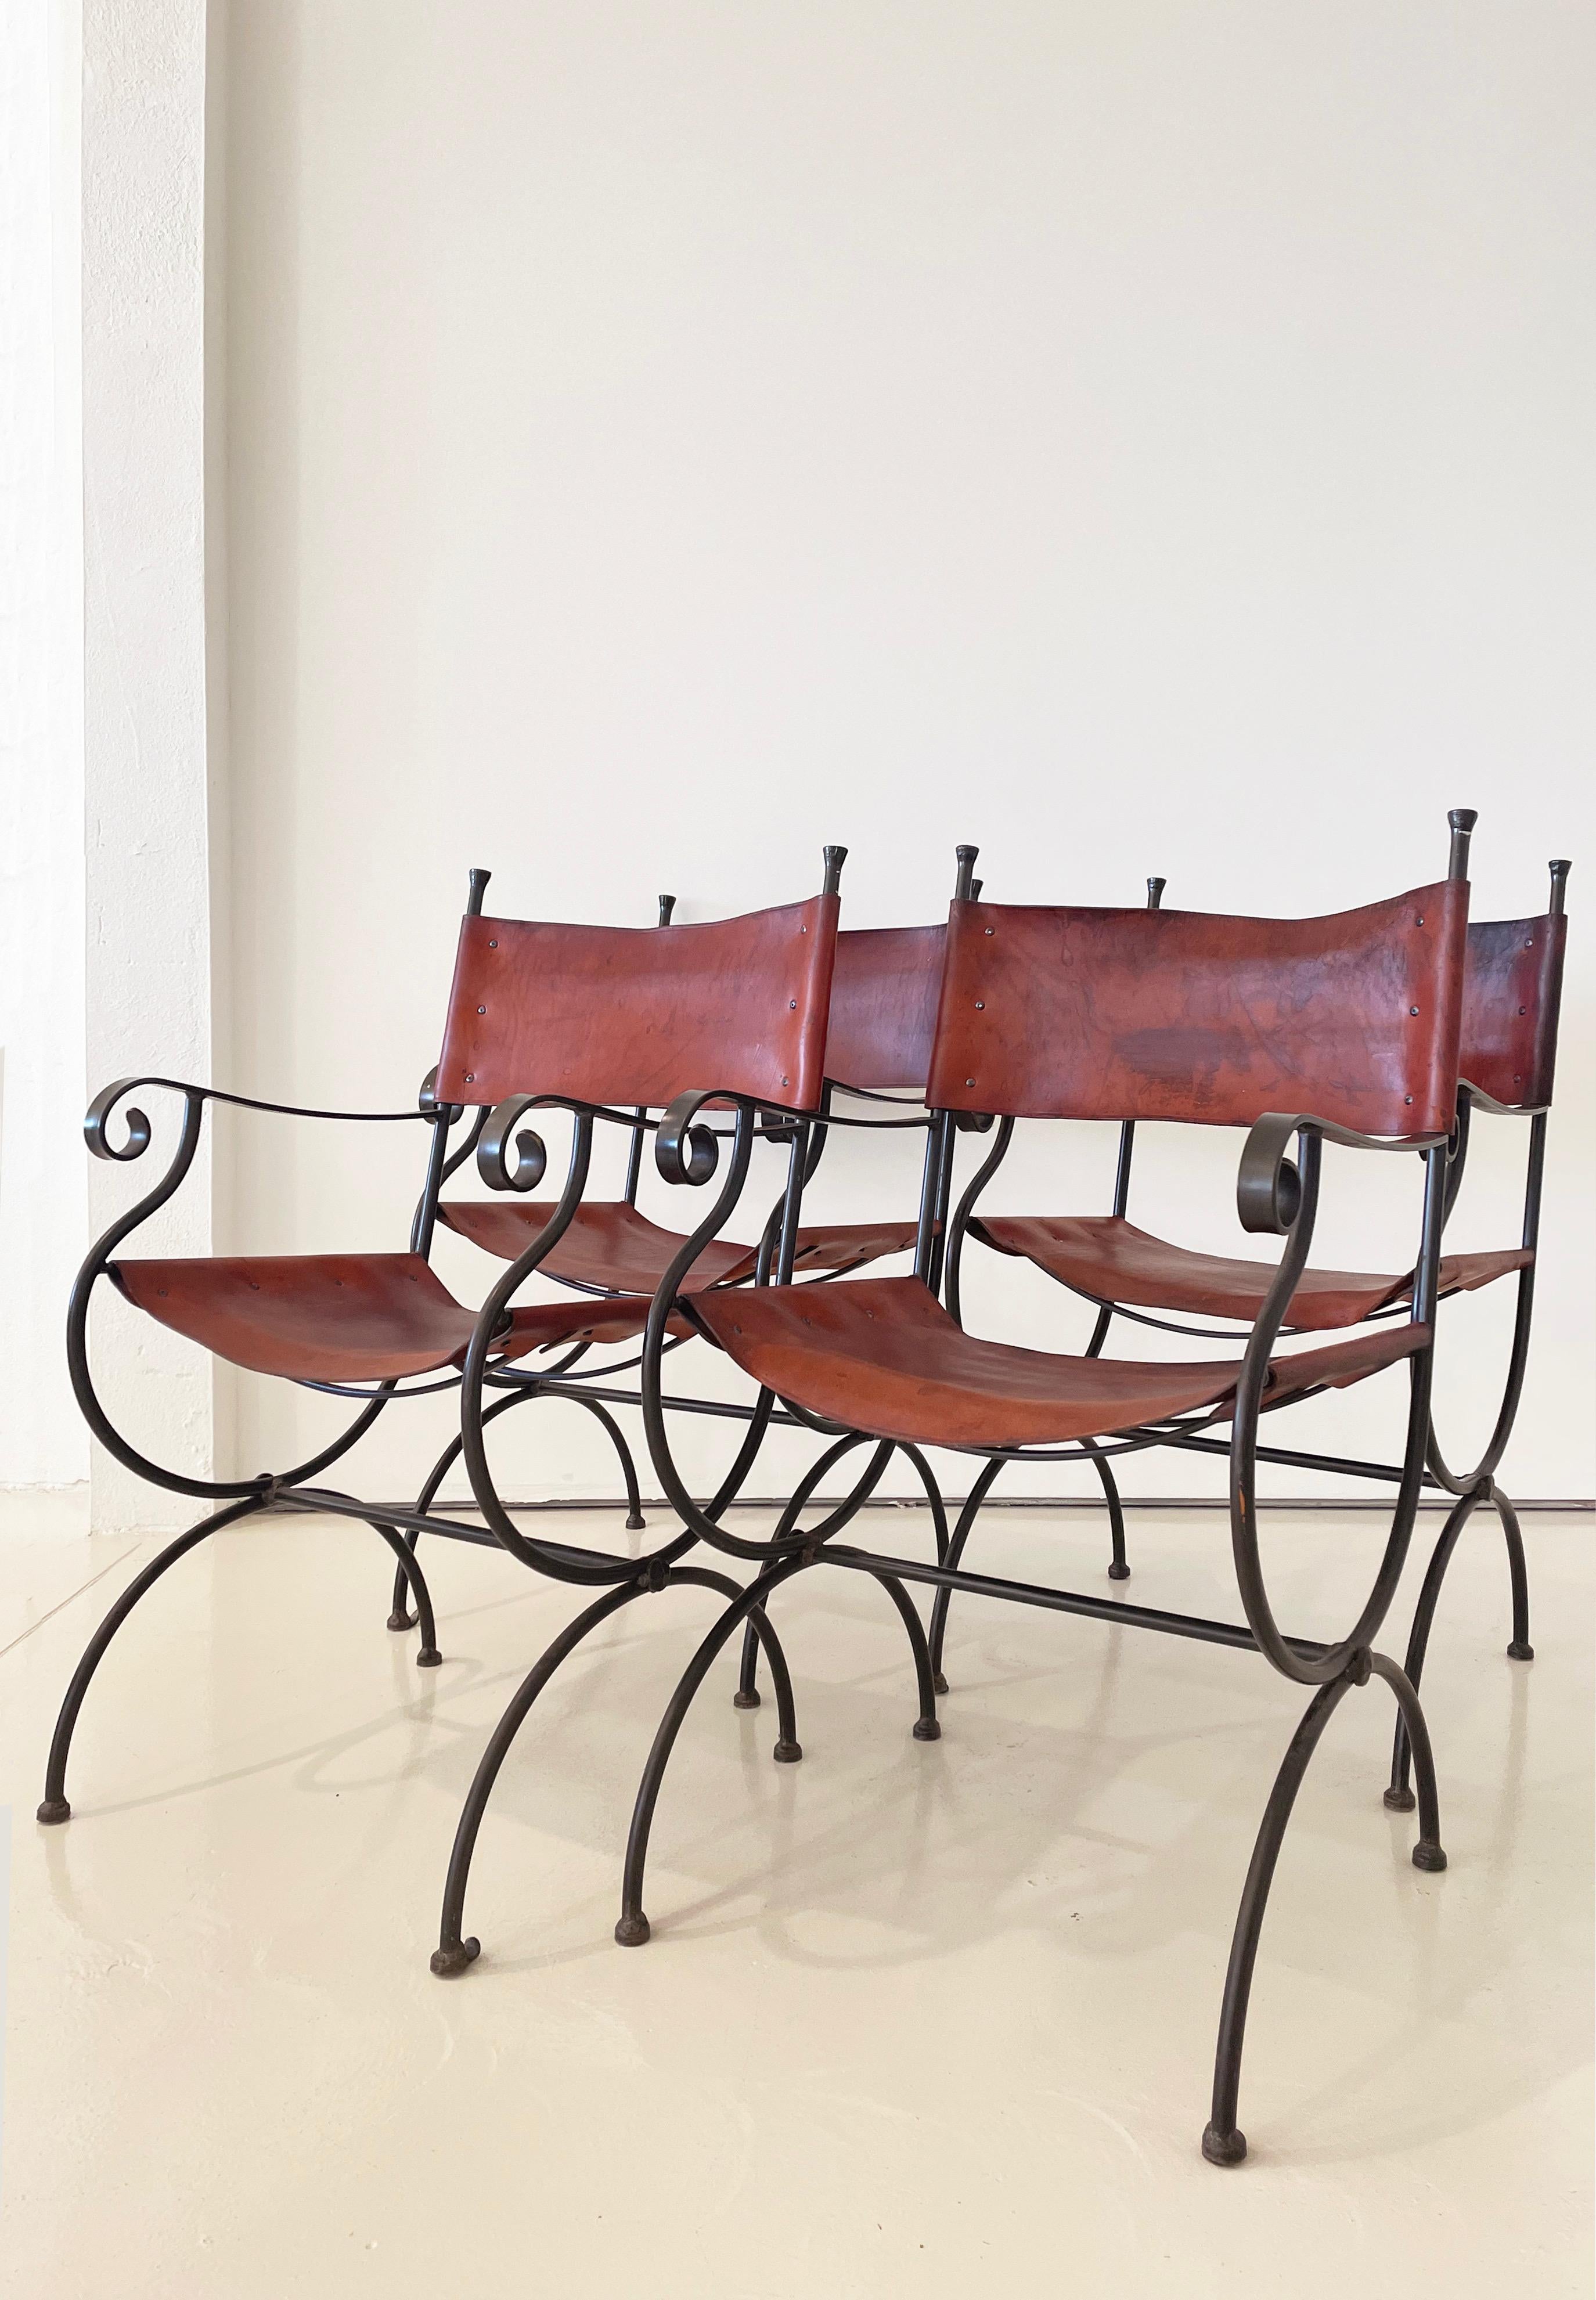 Legacy Collection captain dining chairs by Charleston Forge (original manufacturer)

Originally made in Tennessee

Produced between 1980s and early 2000s.

Solid, hand-forged and wrought iron frames

Original thick, belt leather sling back